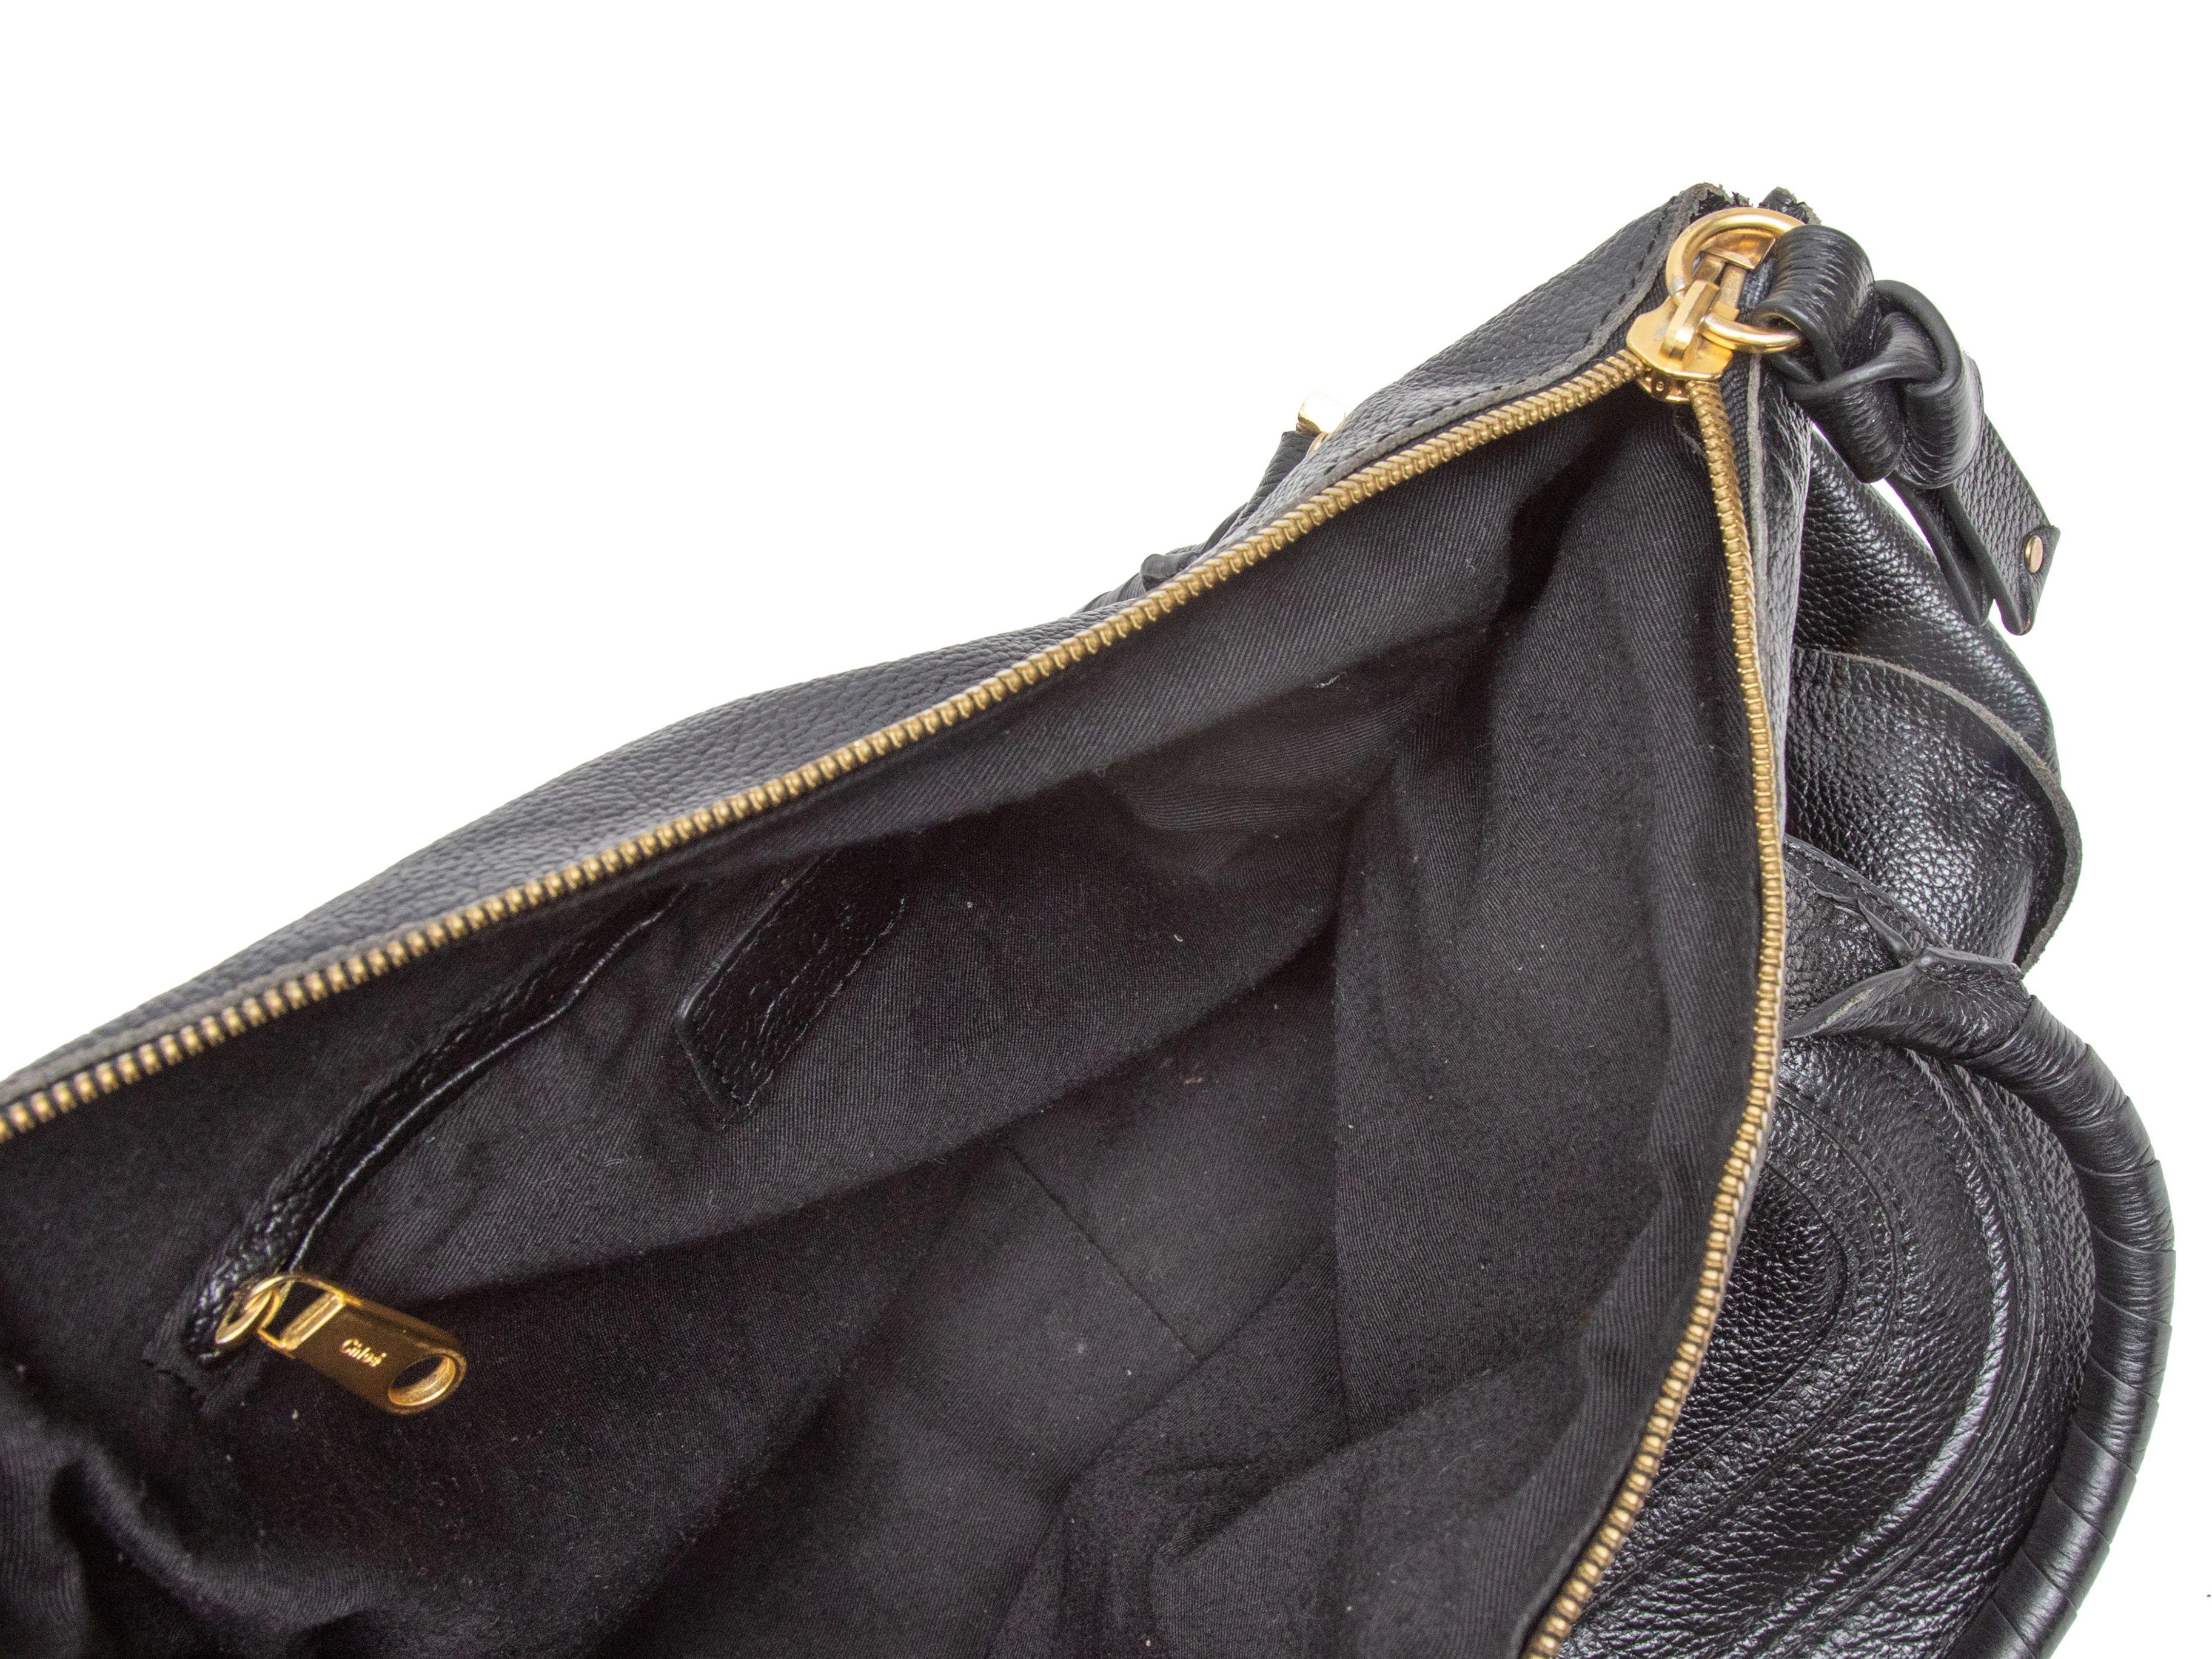 Product Details: Black Chloe Marcie Leather Shoulder Bag. The Marcie Bag features a leather body, gold-tone hardware, dual top handles, a front flap pocket, and a top zip closure. 17